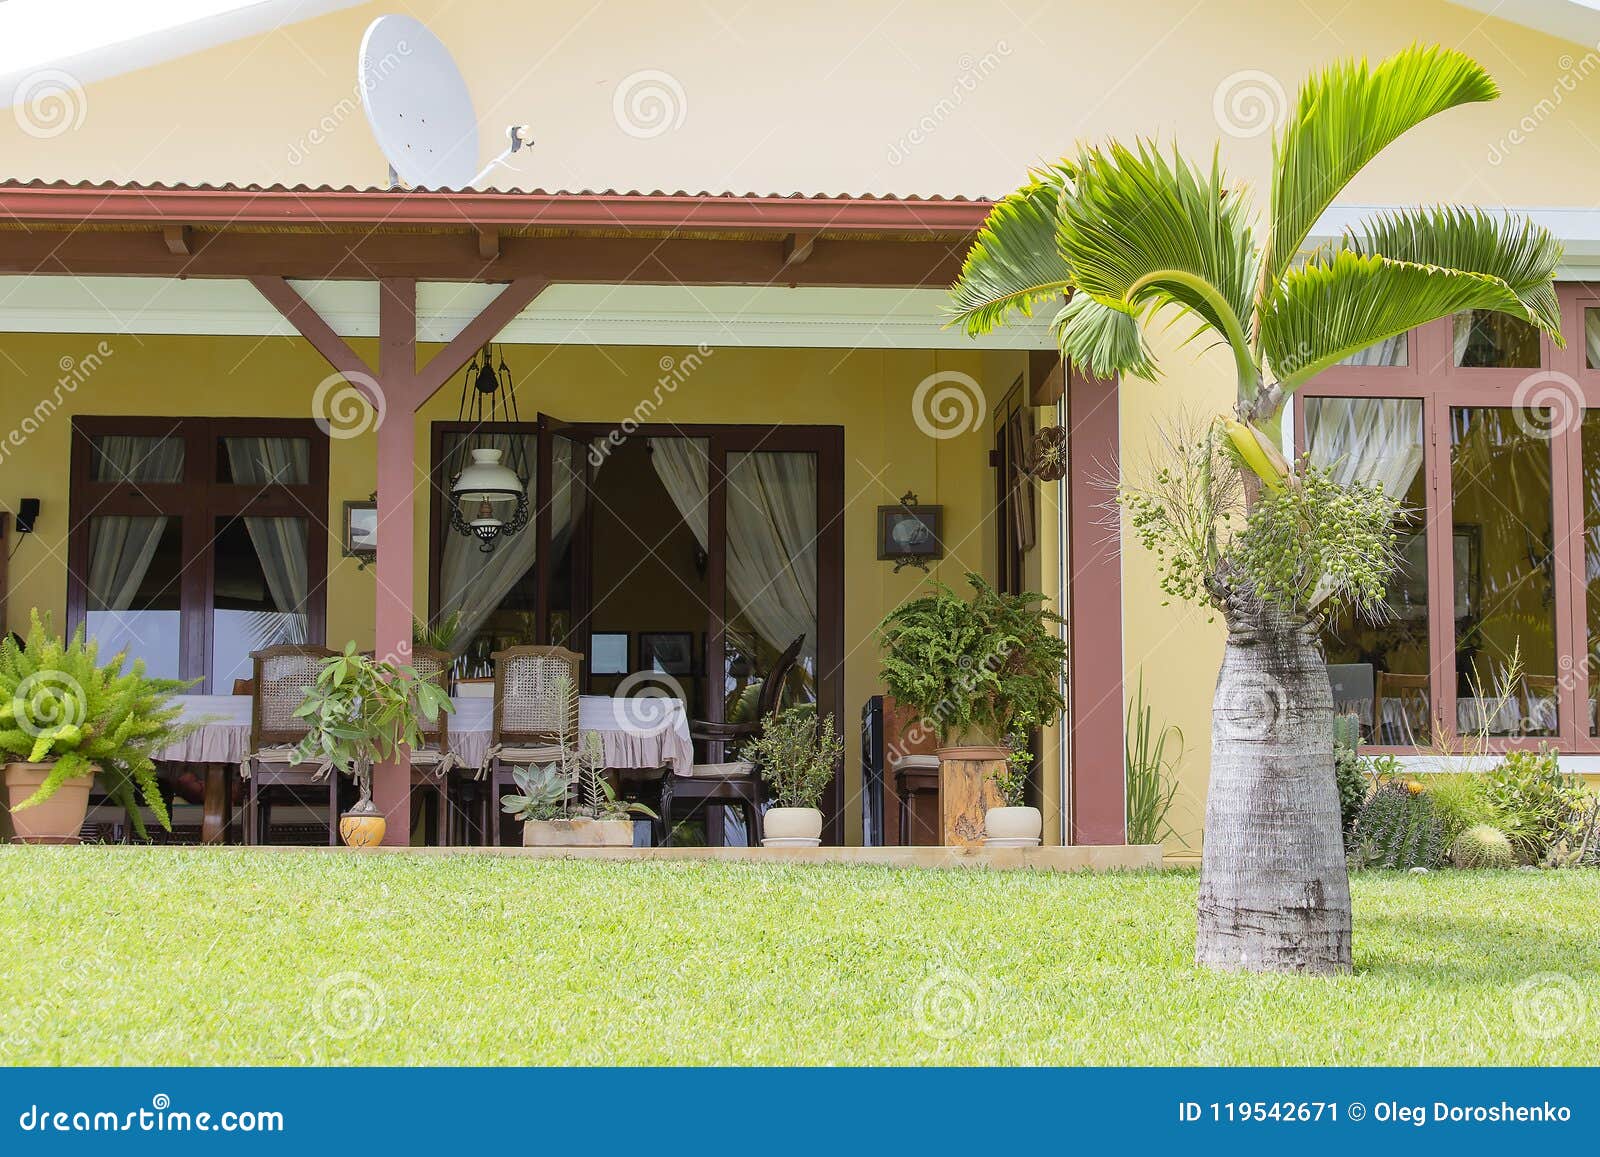 Table Chairs And Palm Tree In Summer Garden At Sunny Day